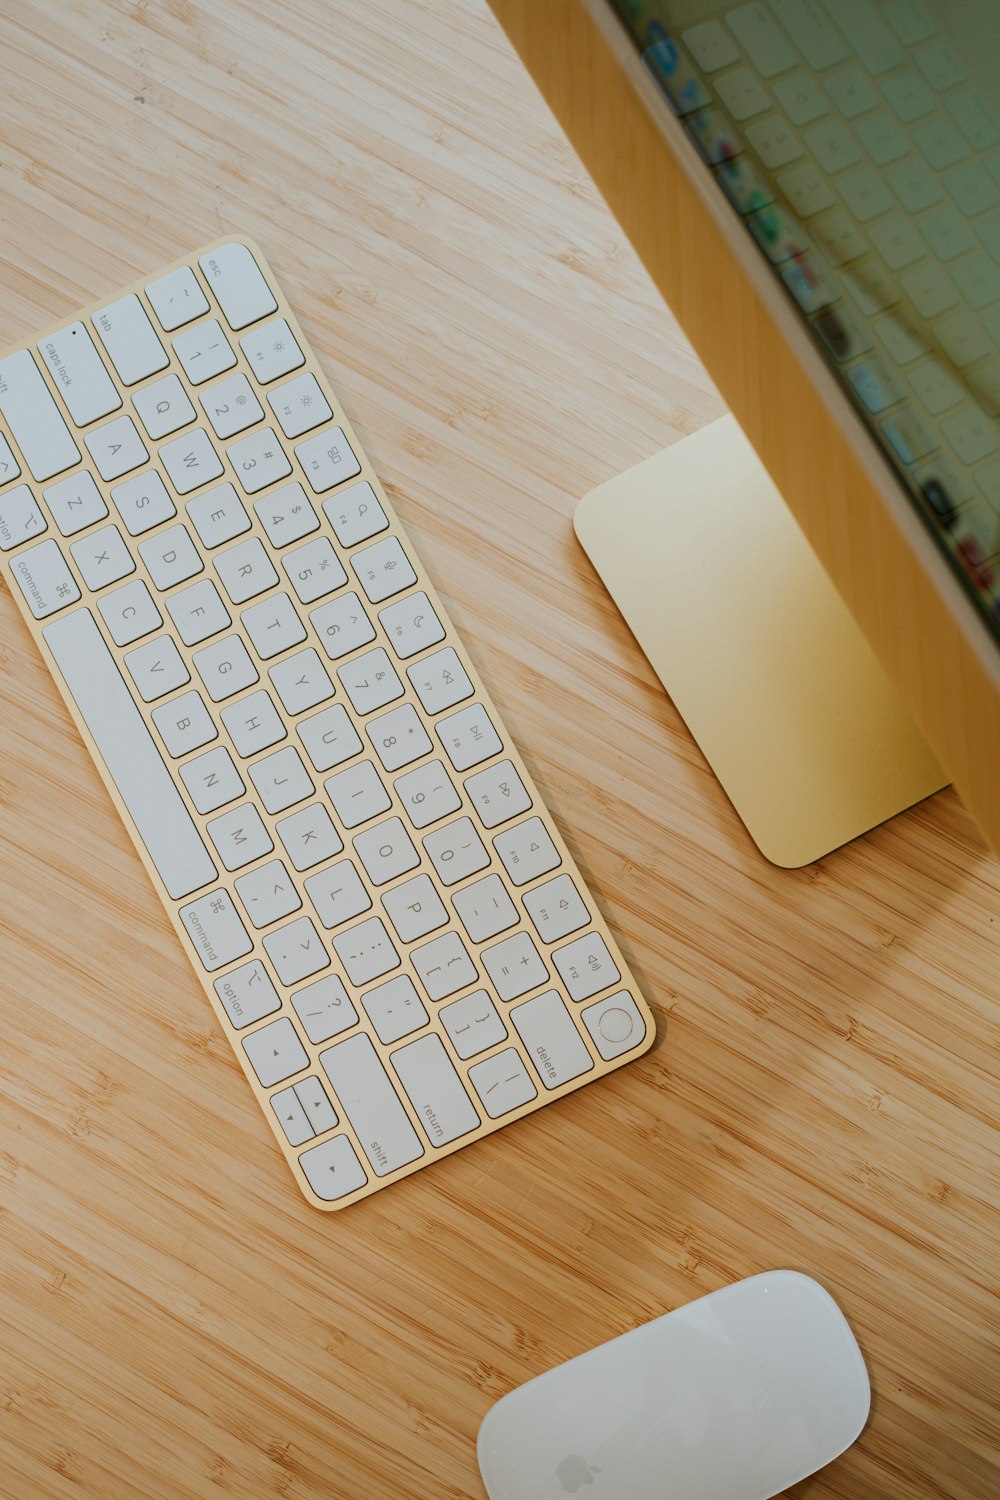 white apple keyboard on brown wooden table